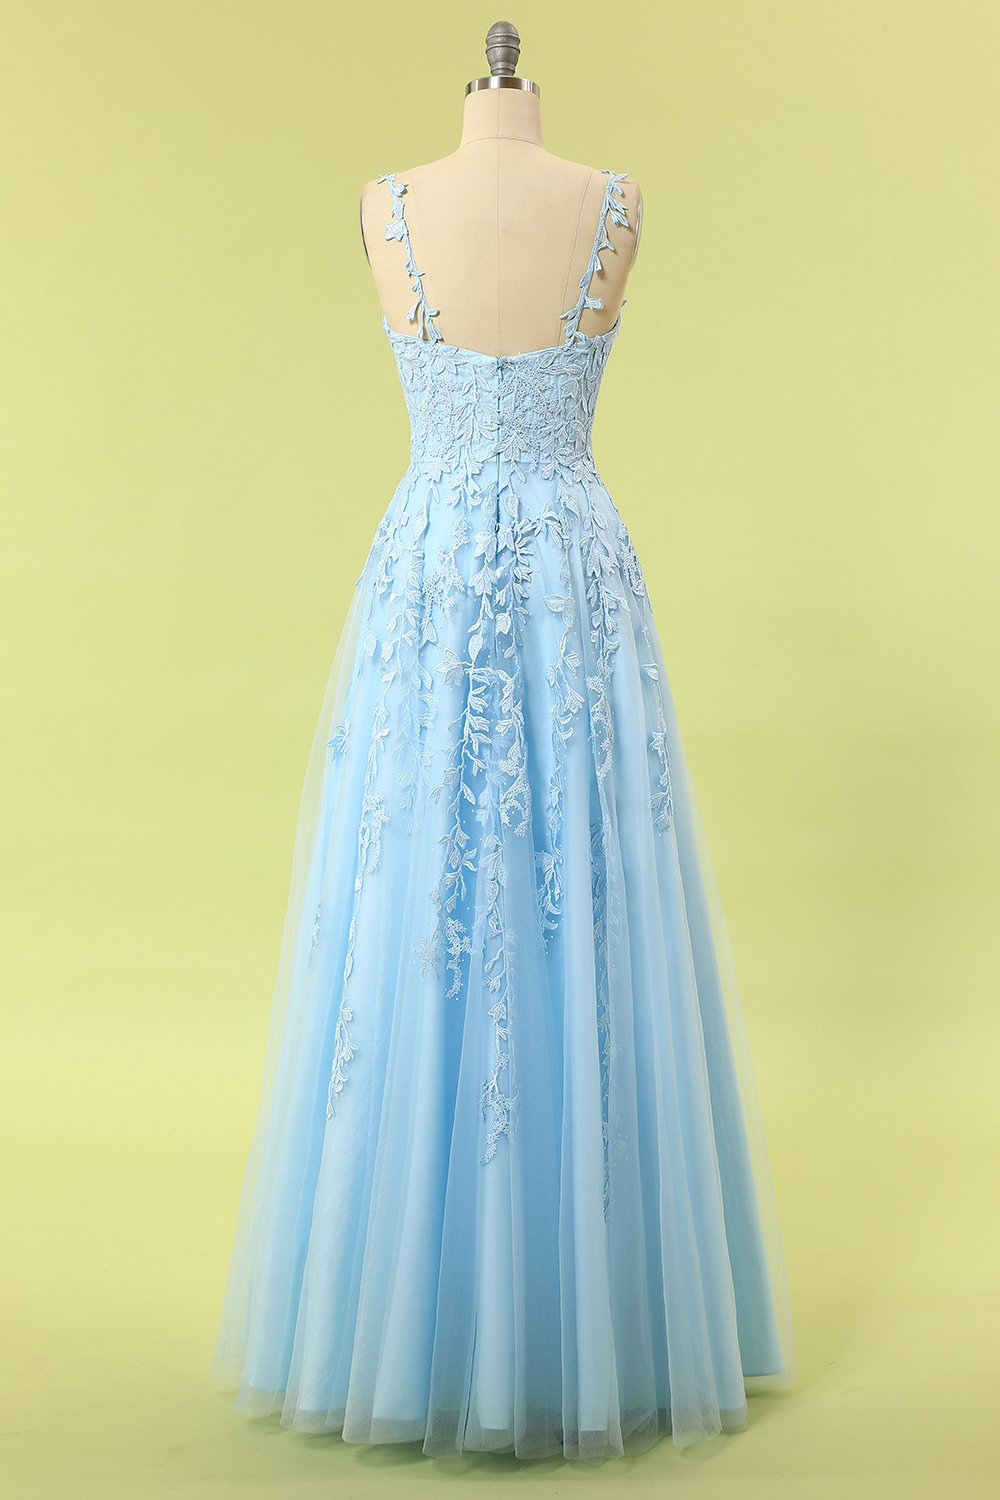 Zapaka Purple Tulle Ball Dress with Lace Sky Blue Long Evening Prom ...